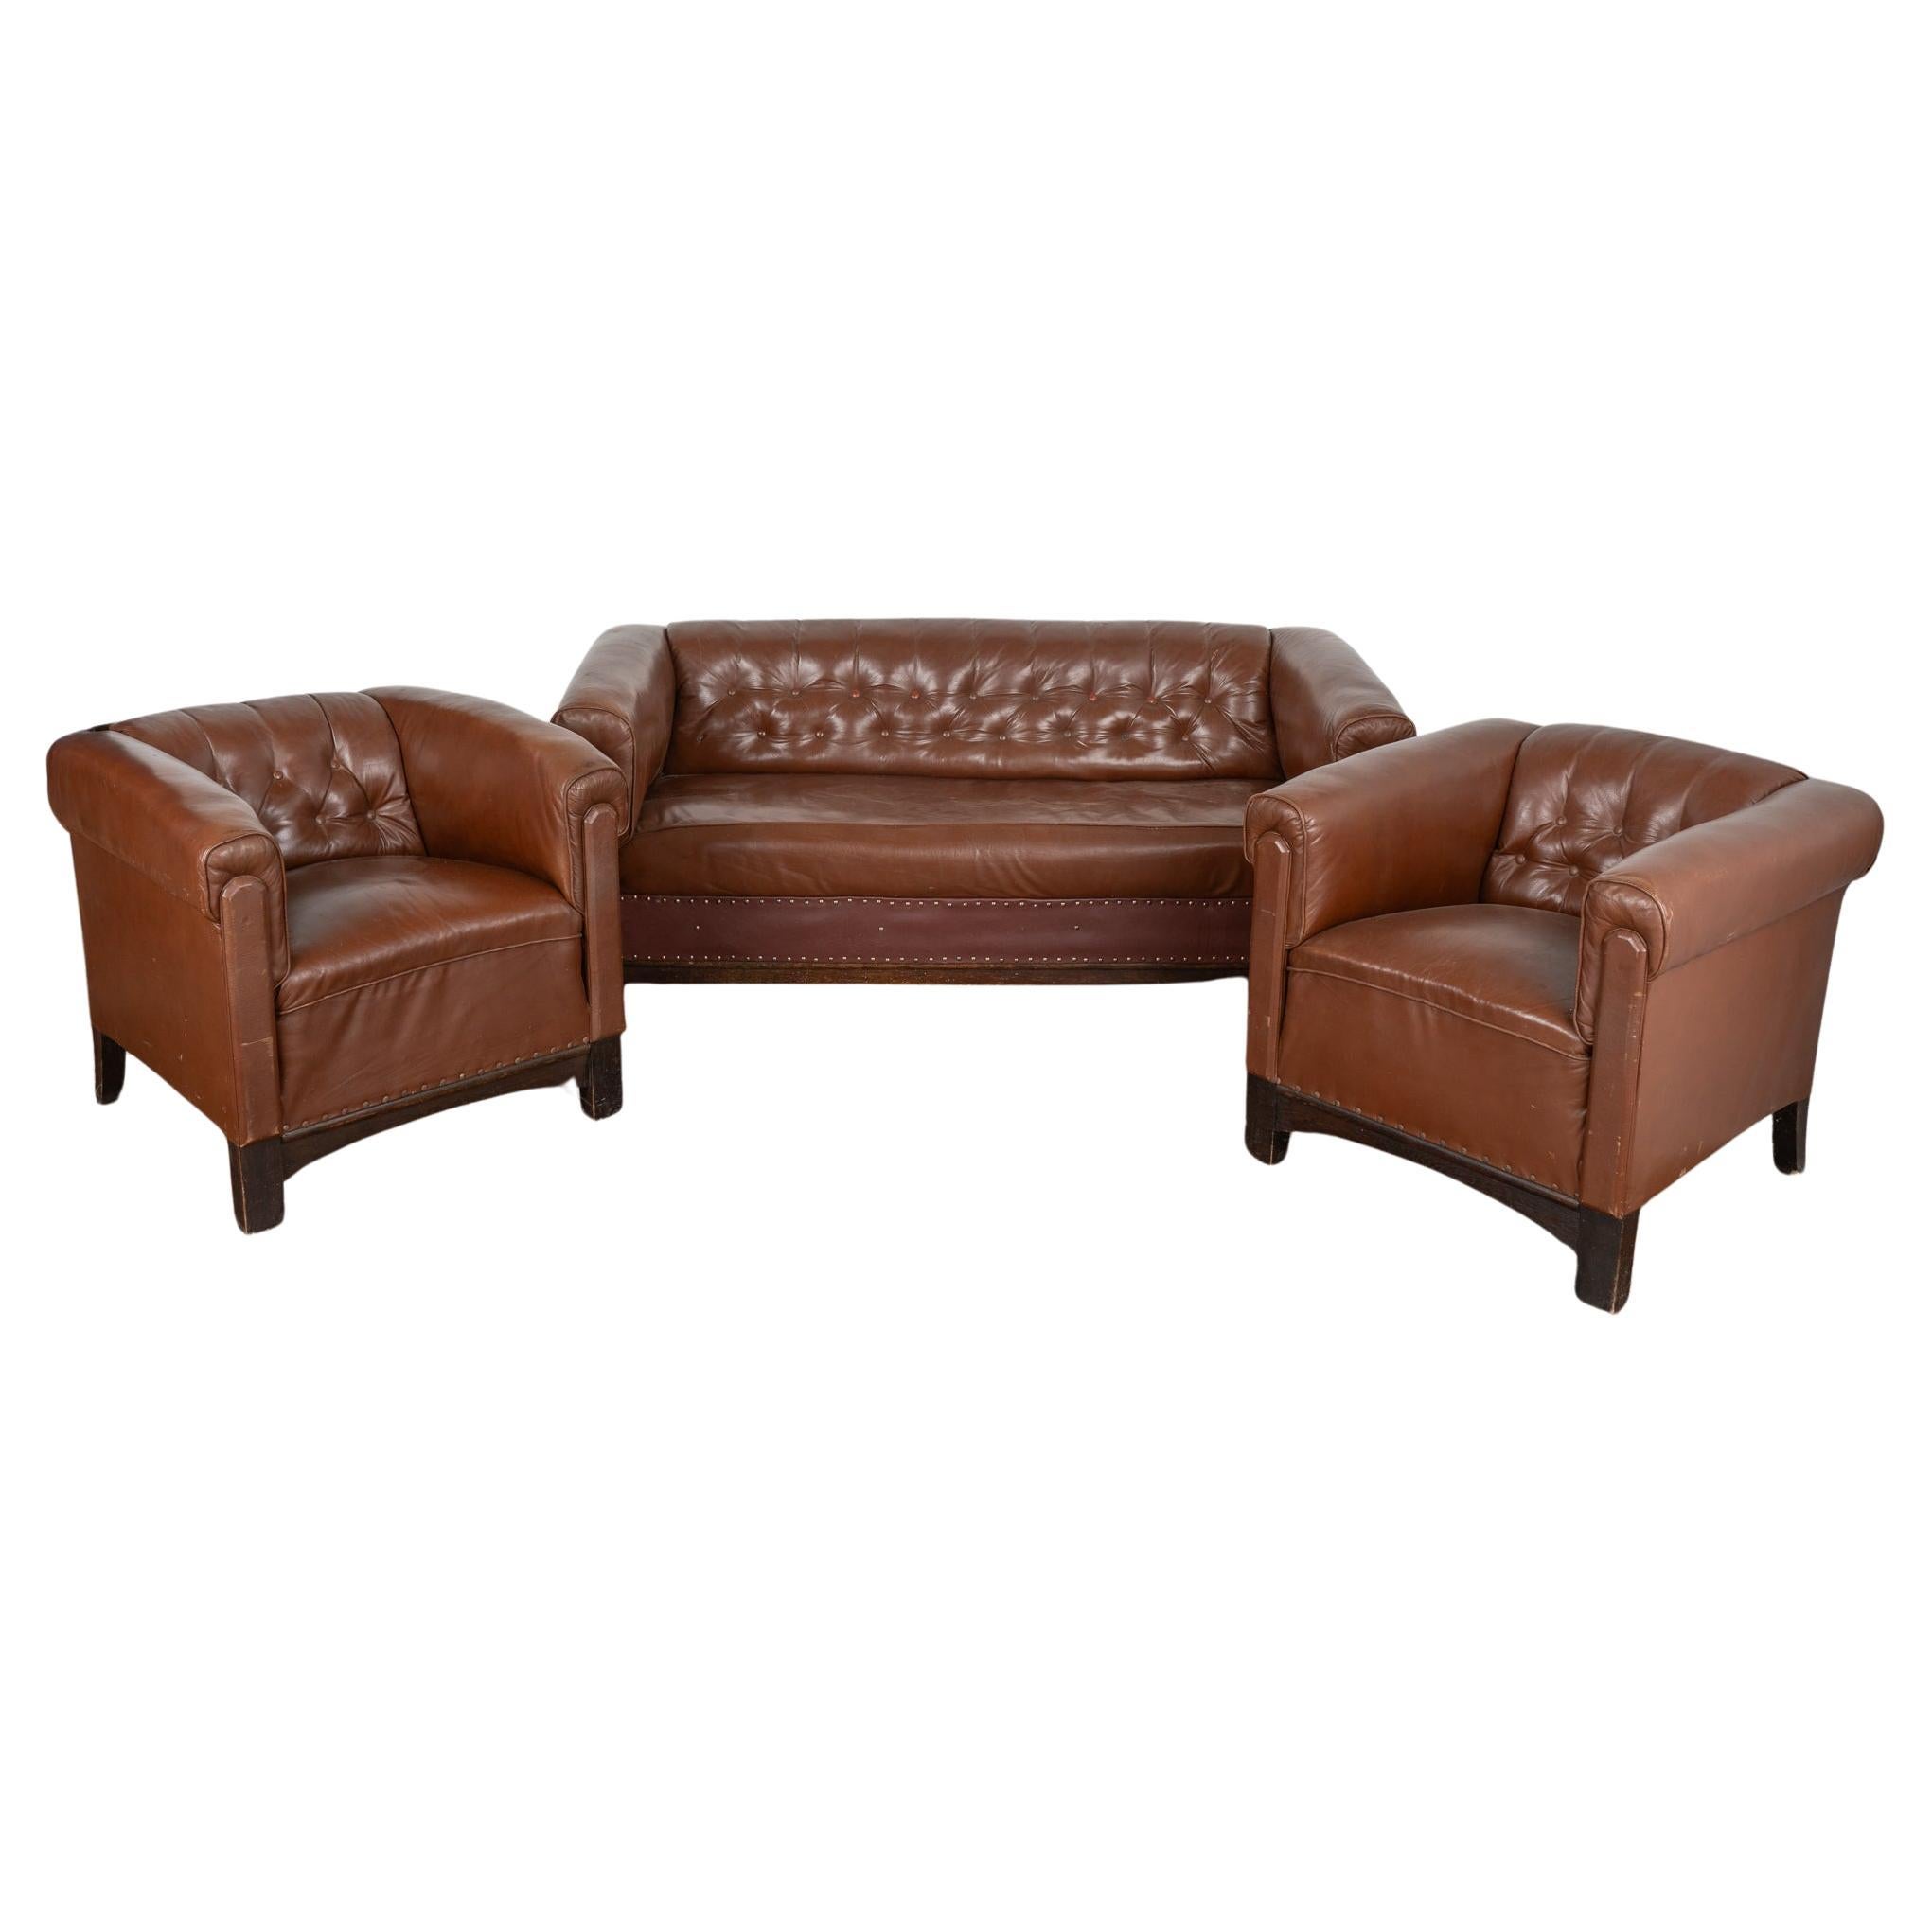 Set of 3, Vintage Brown Leather Sofa and Pair of Club Chairs, Denmark circa 1960